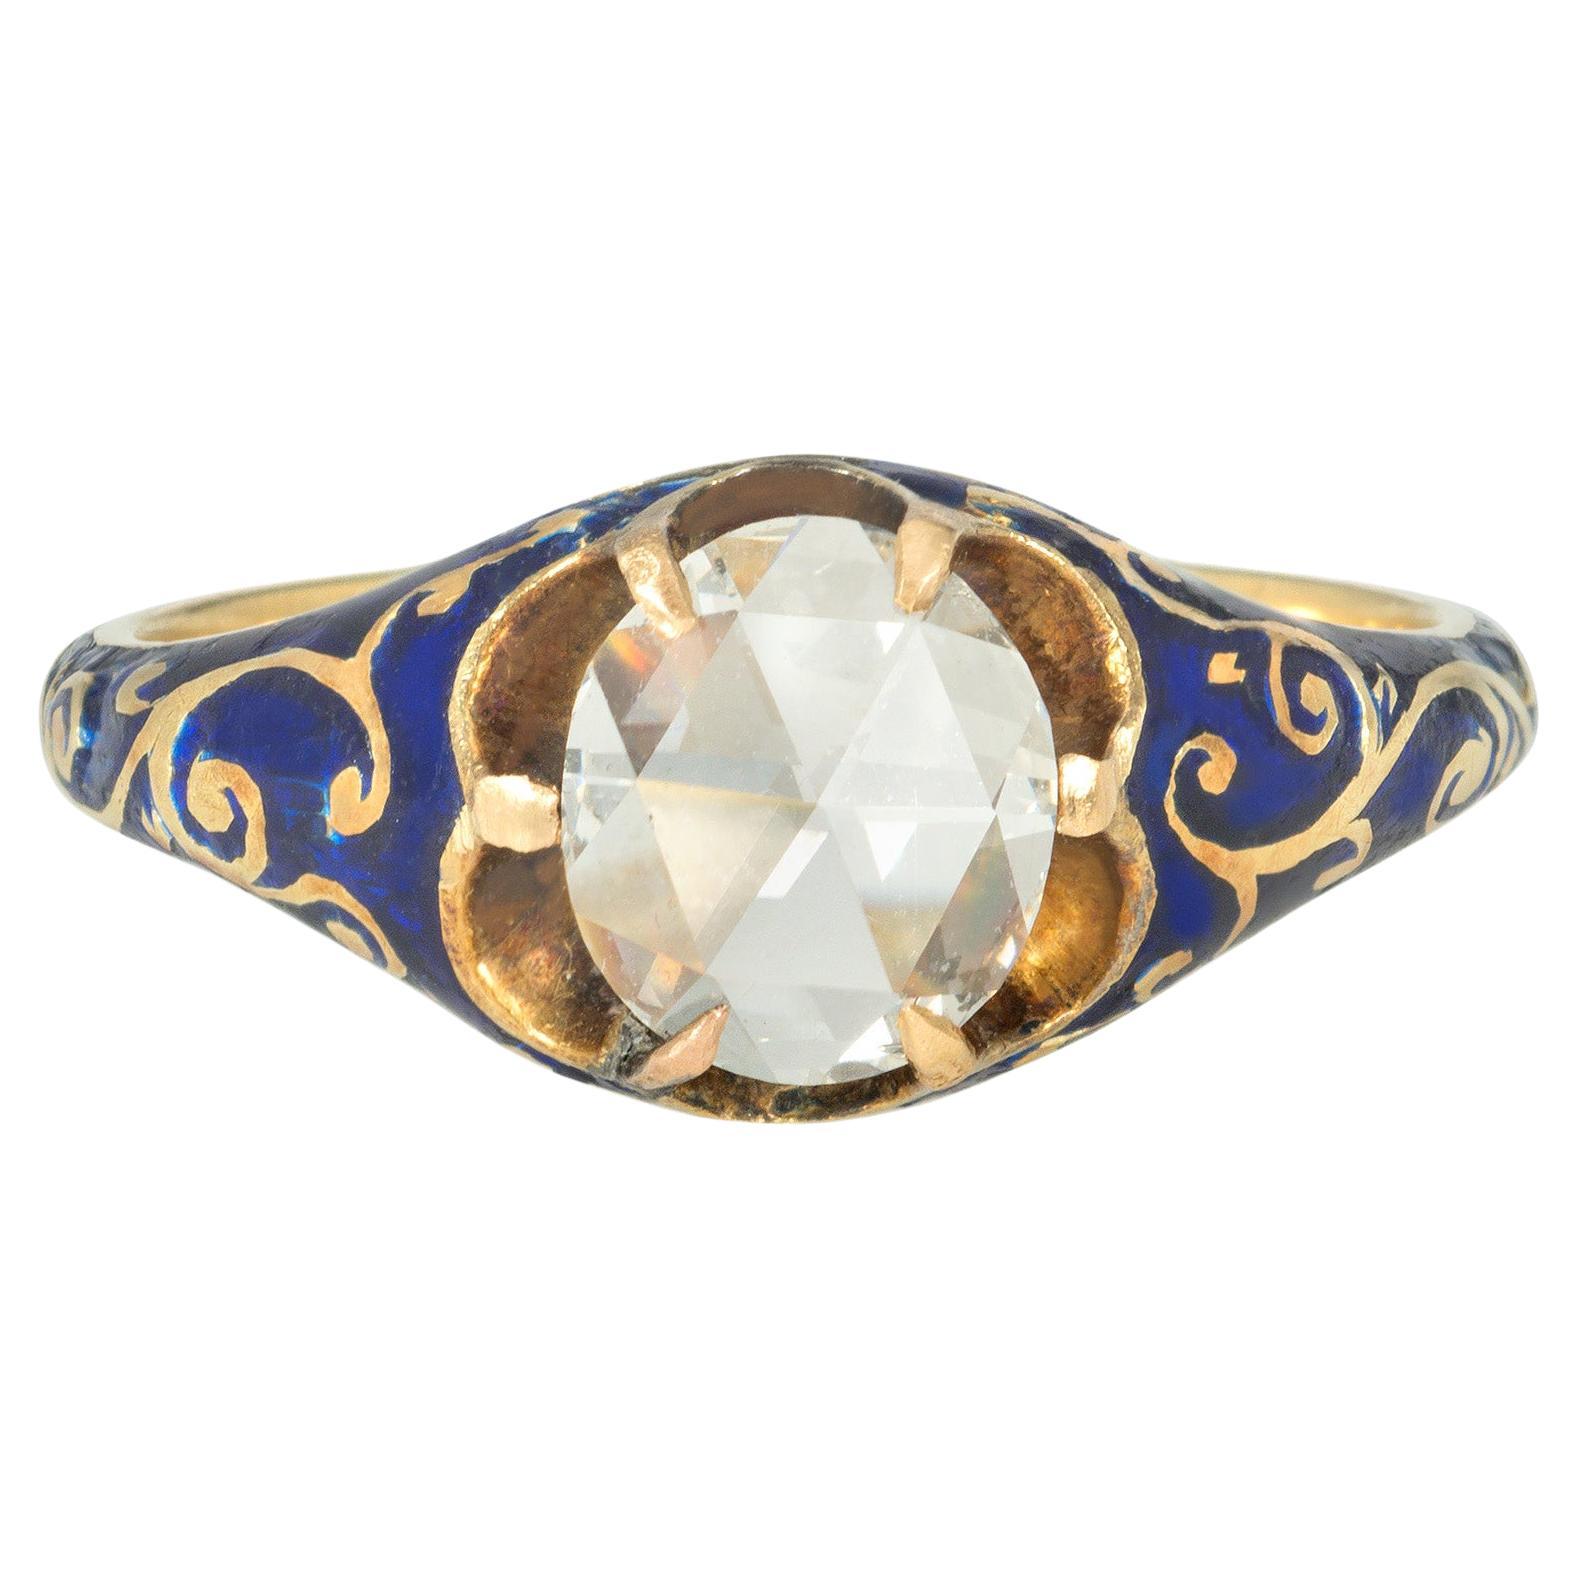 English Early Victorian Gold, Blue Enamel, and Rose-Cut Diamond Ring For Sale